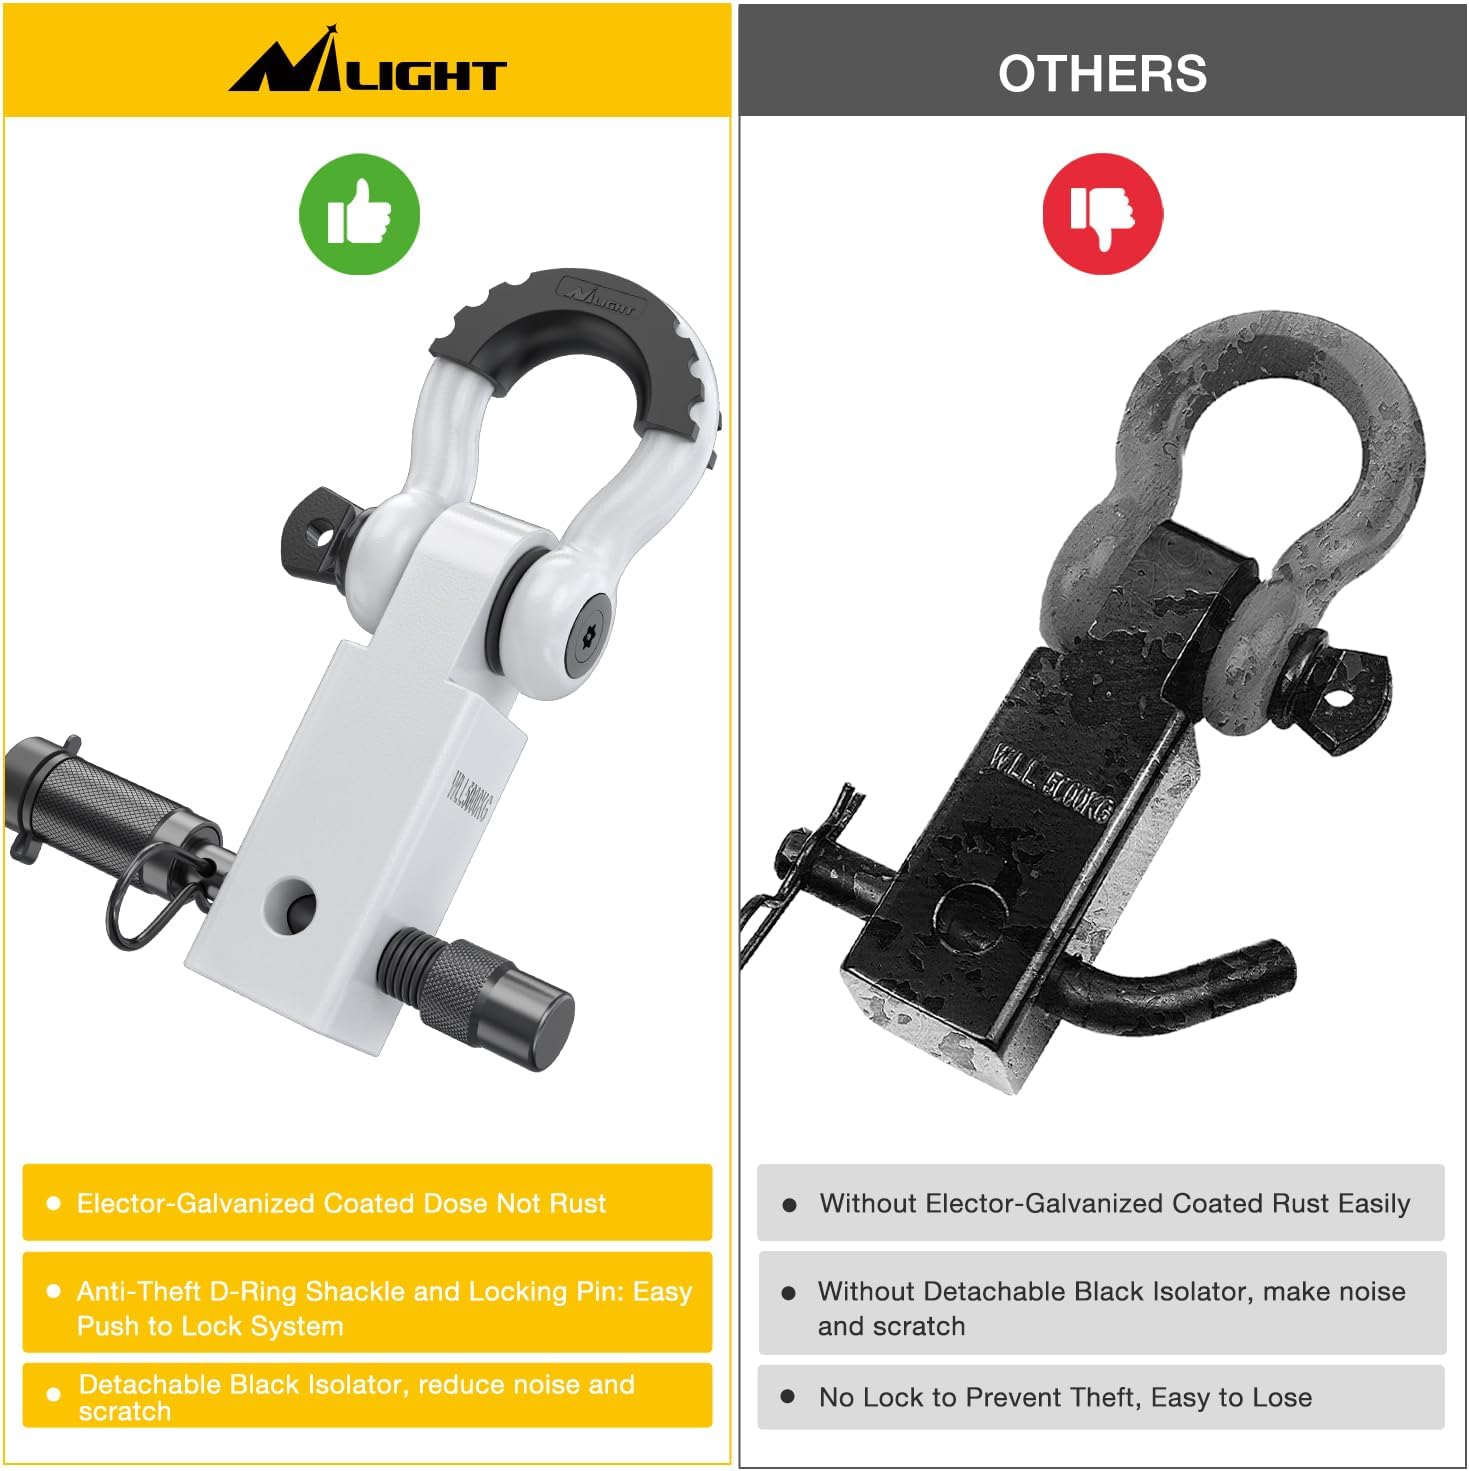 2" Anti-Theft Shackle Hitch Receiver Set White Nilight